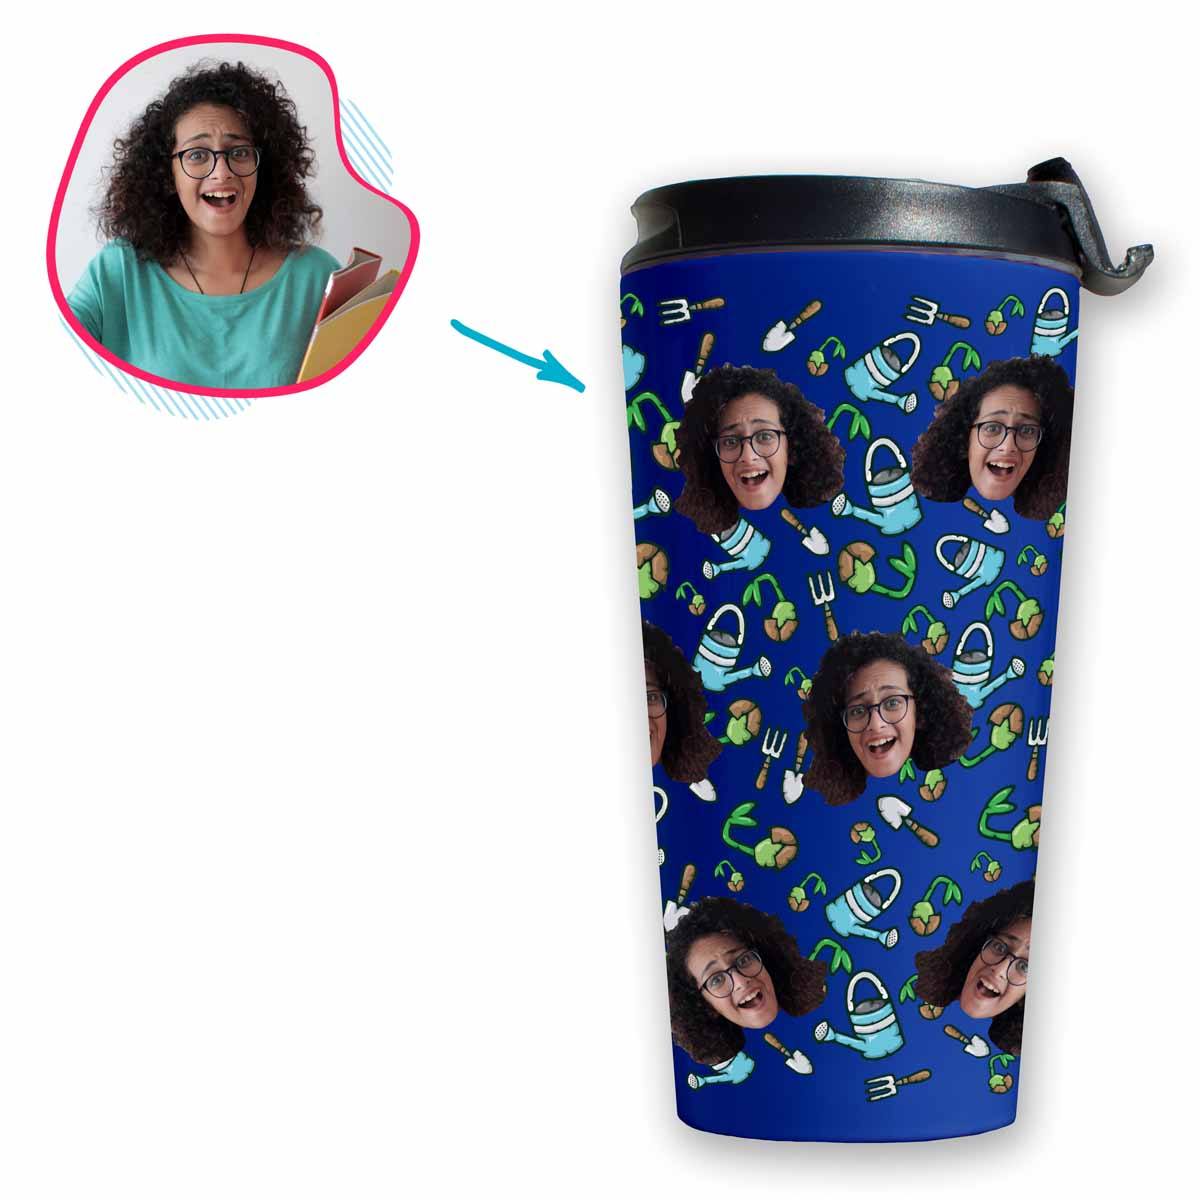 darkblue Gardening travel mug personalized with photo of face printed on it